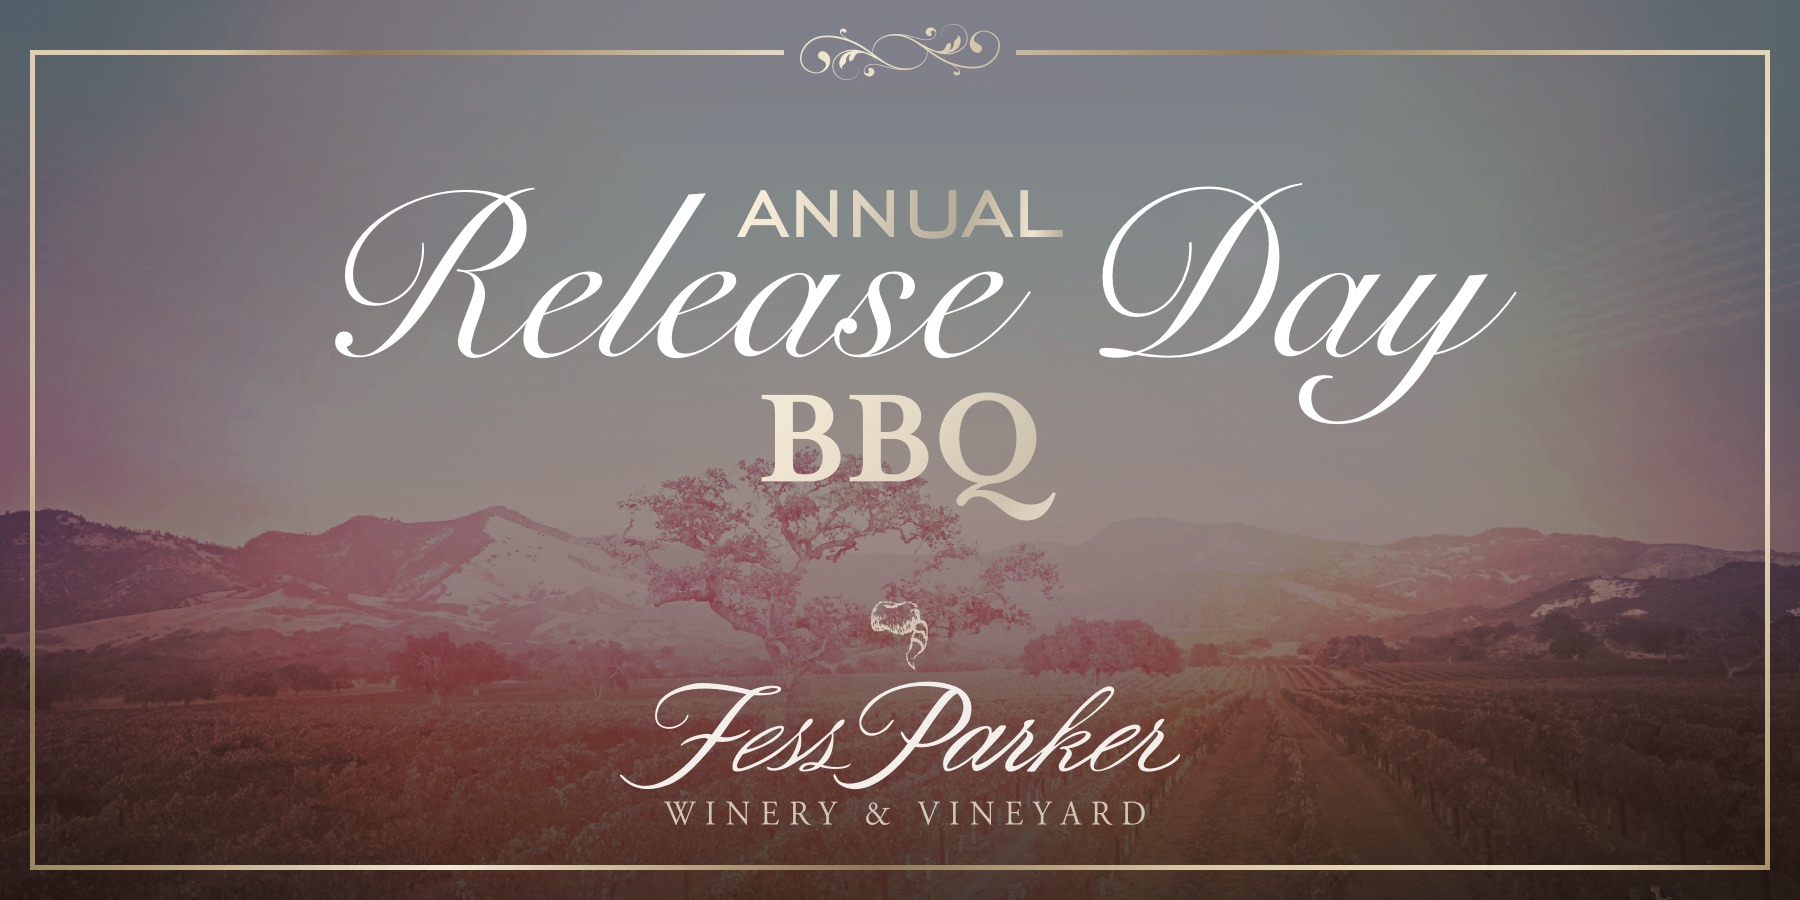  2022 Annual Release Day BBQ